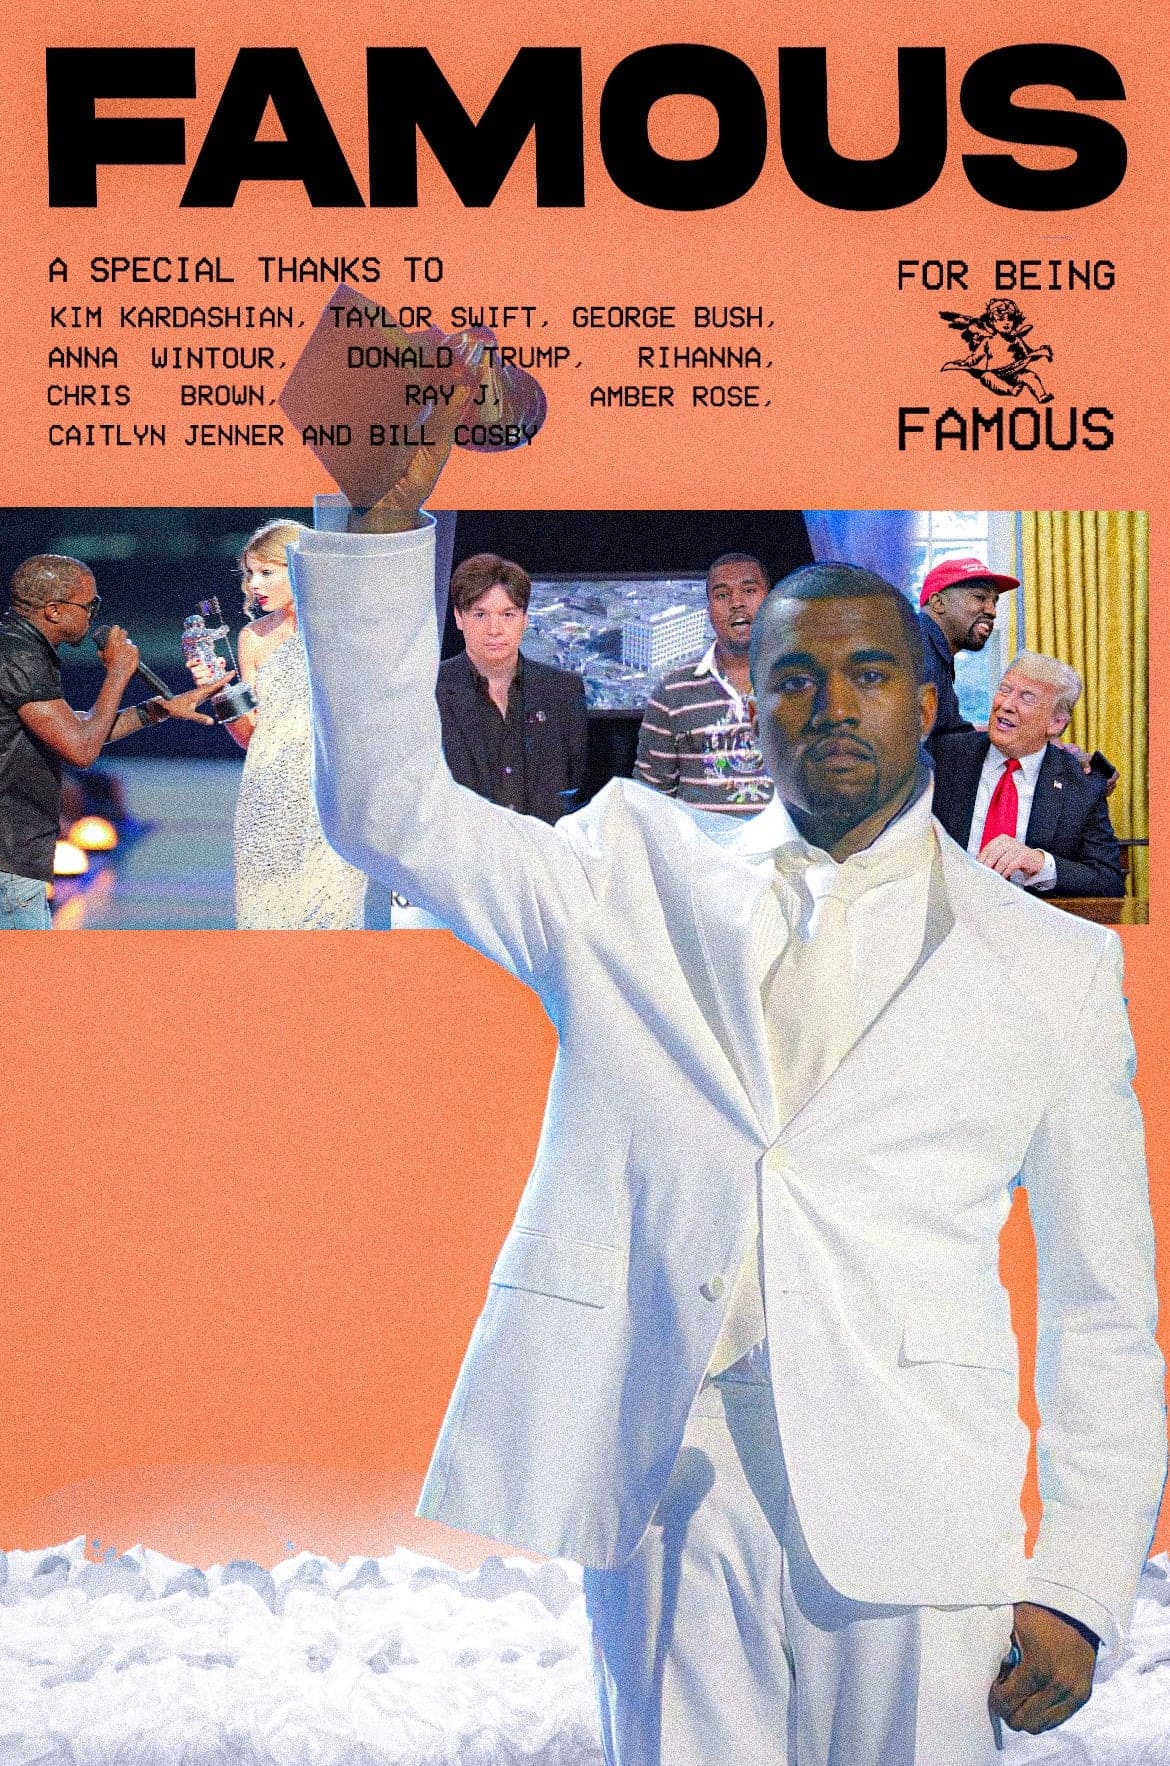 Kanye West 'For Being Famous' Poster – Posters Plug